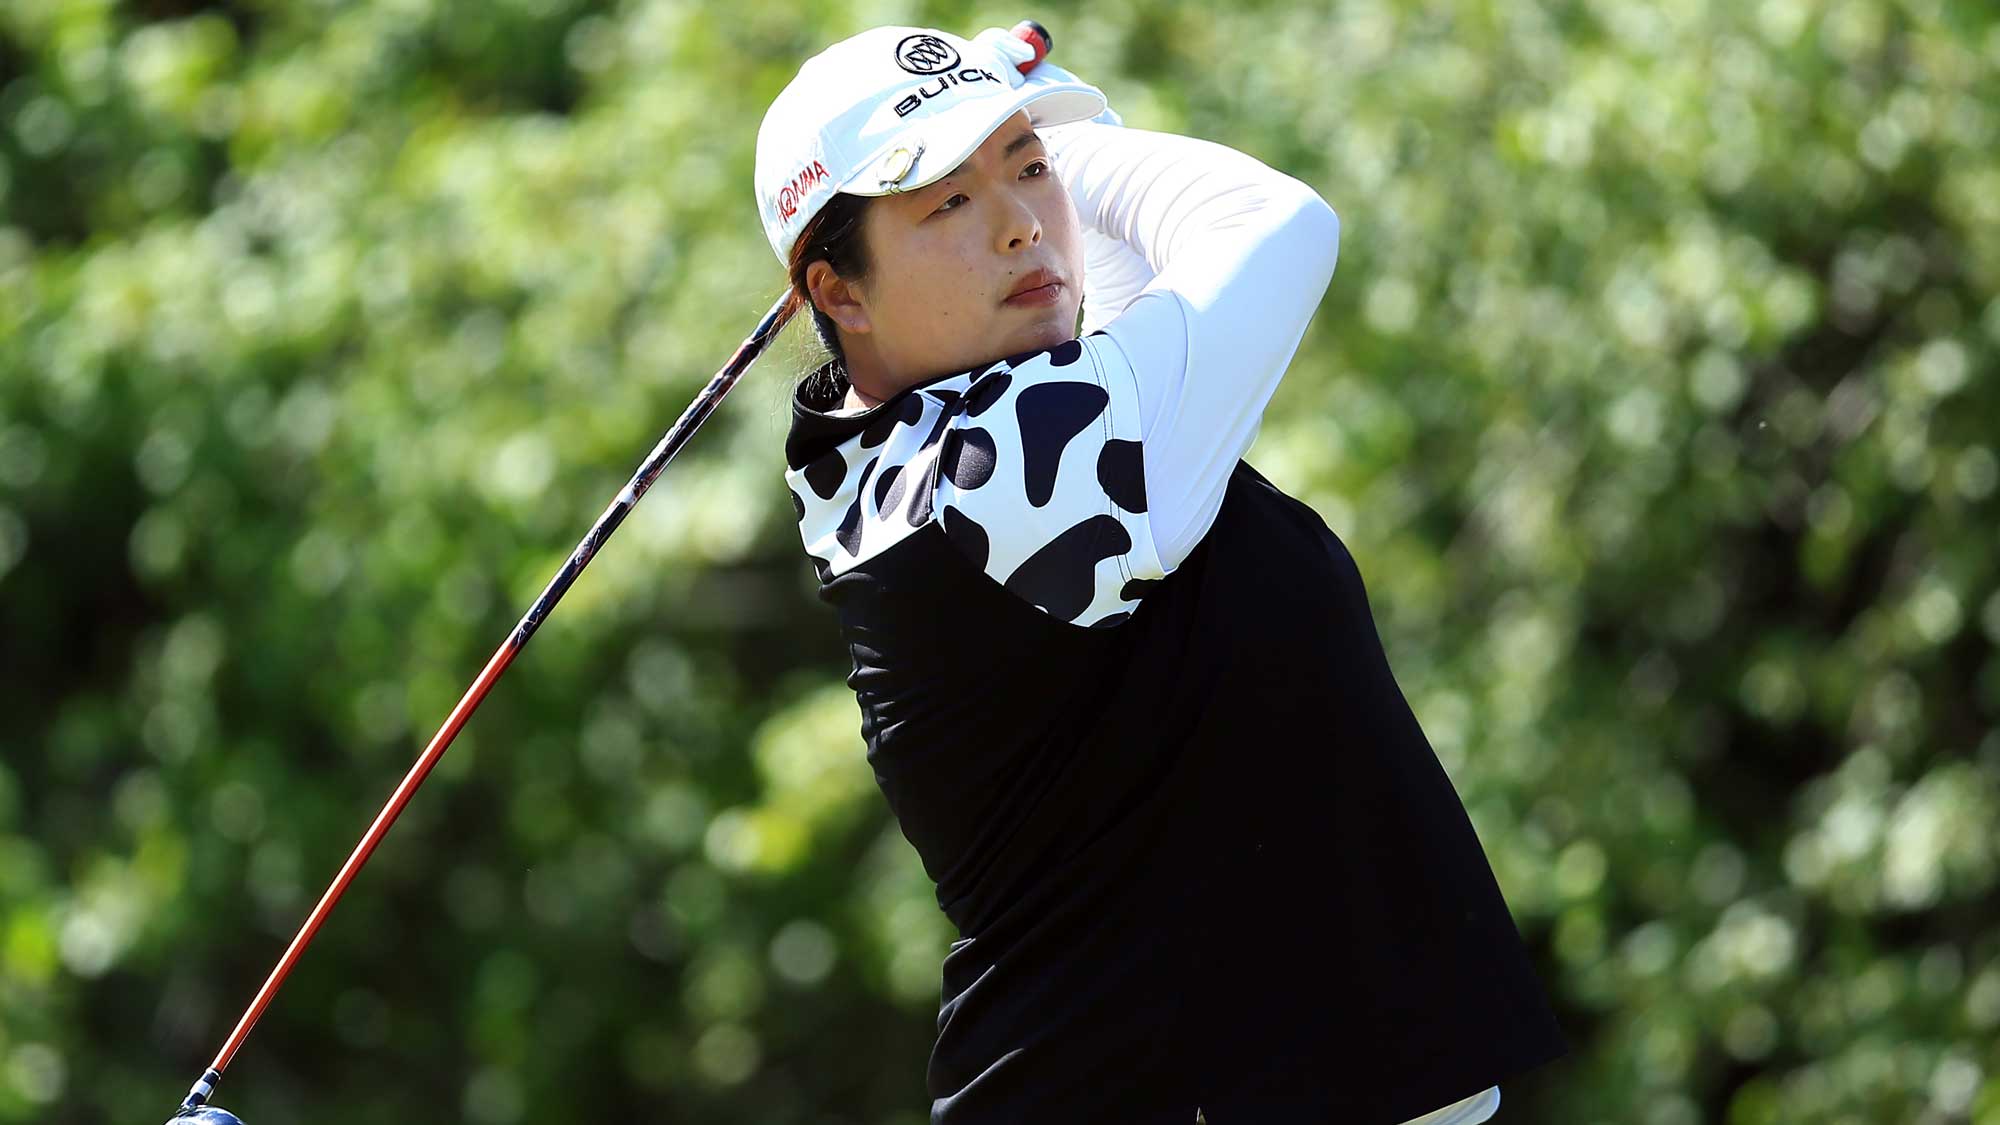 Shanshan Feng of China hits her tee shot on the 18th hole during the first round of the Manulife LPGA Classic